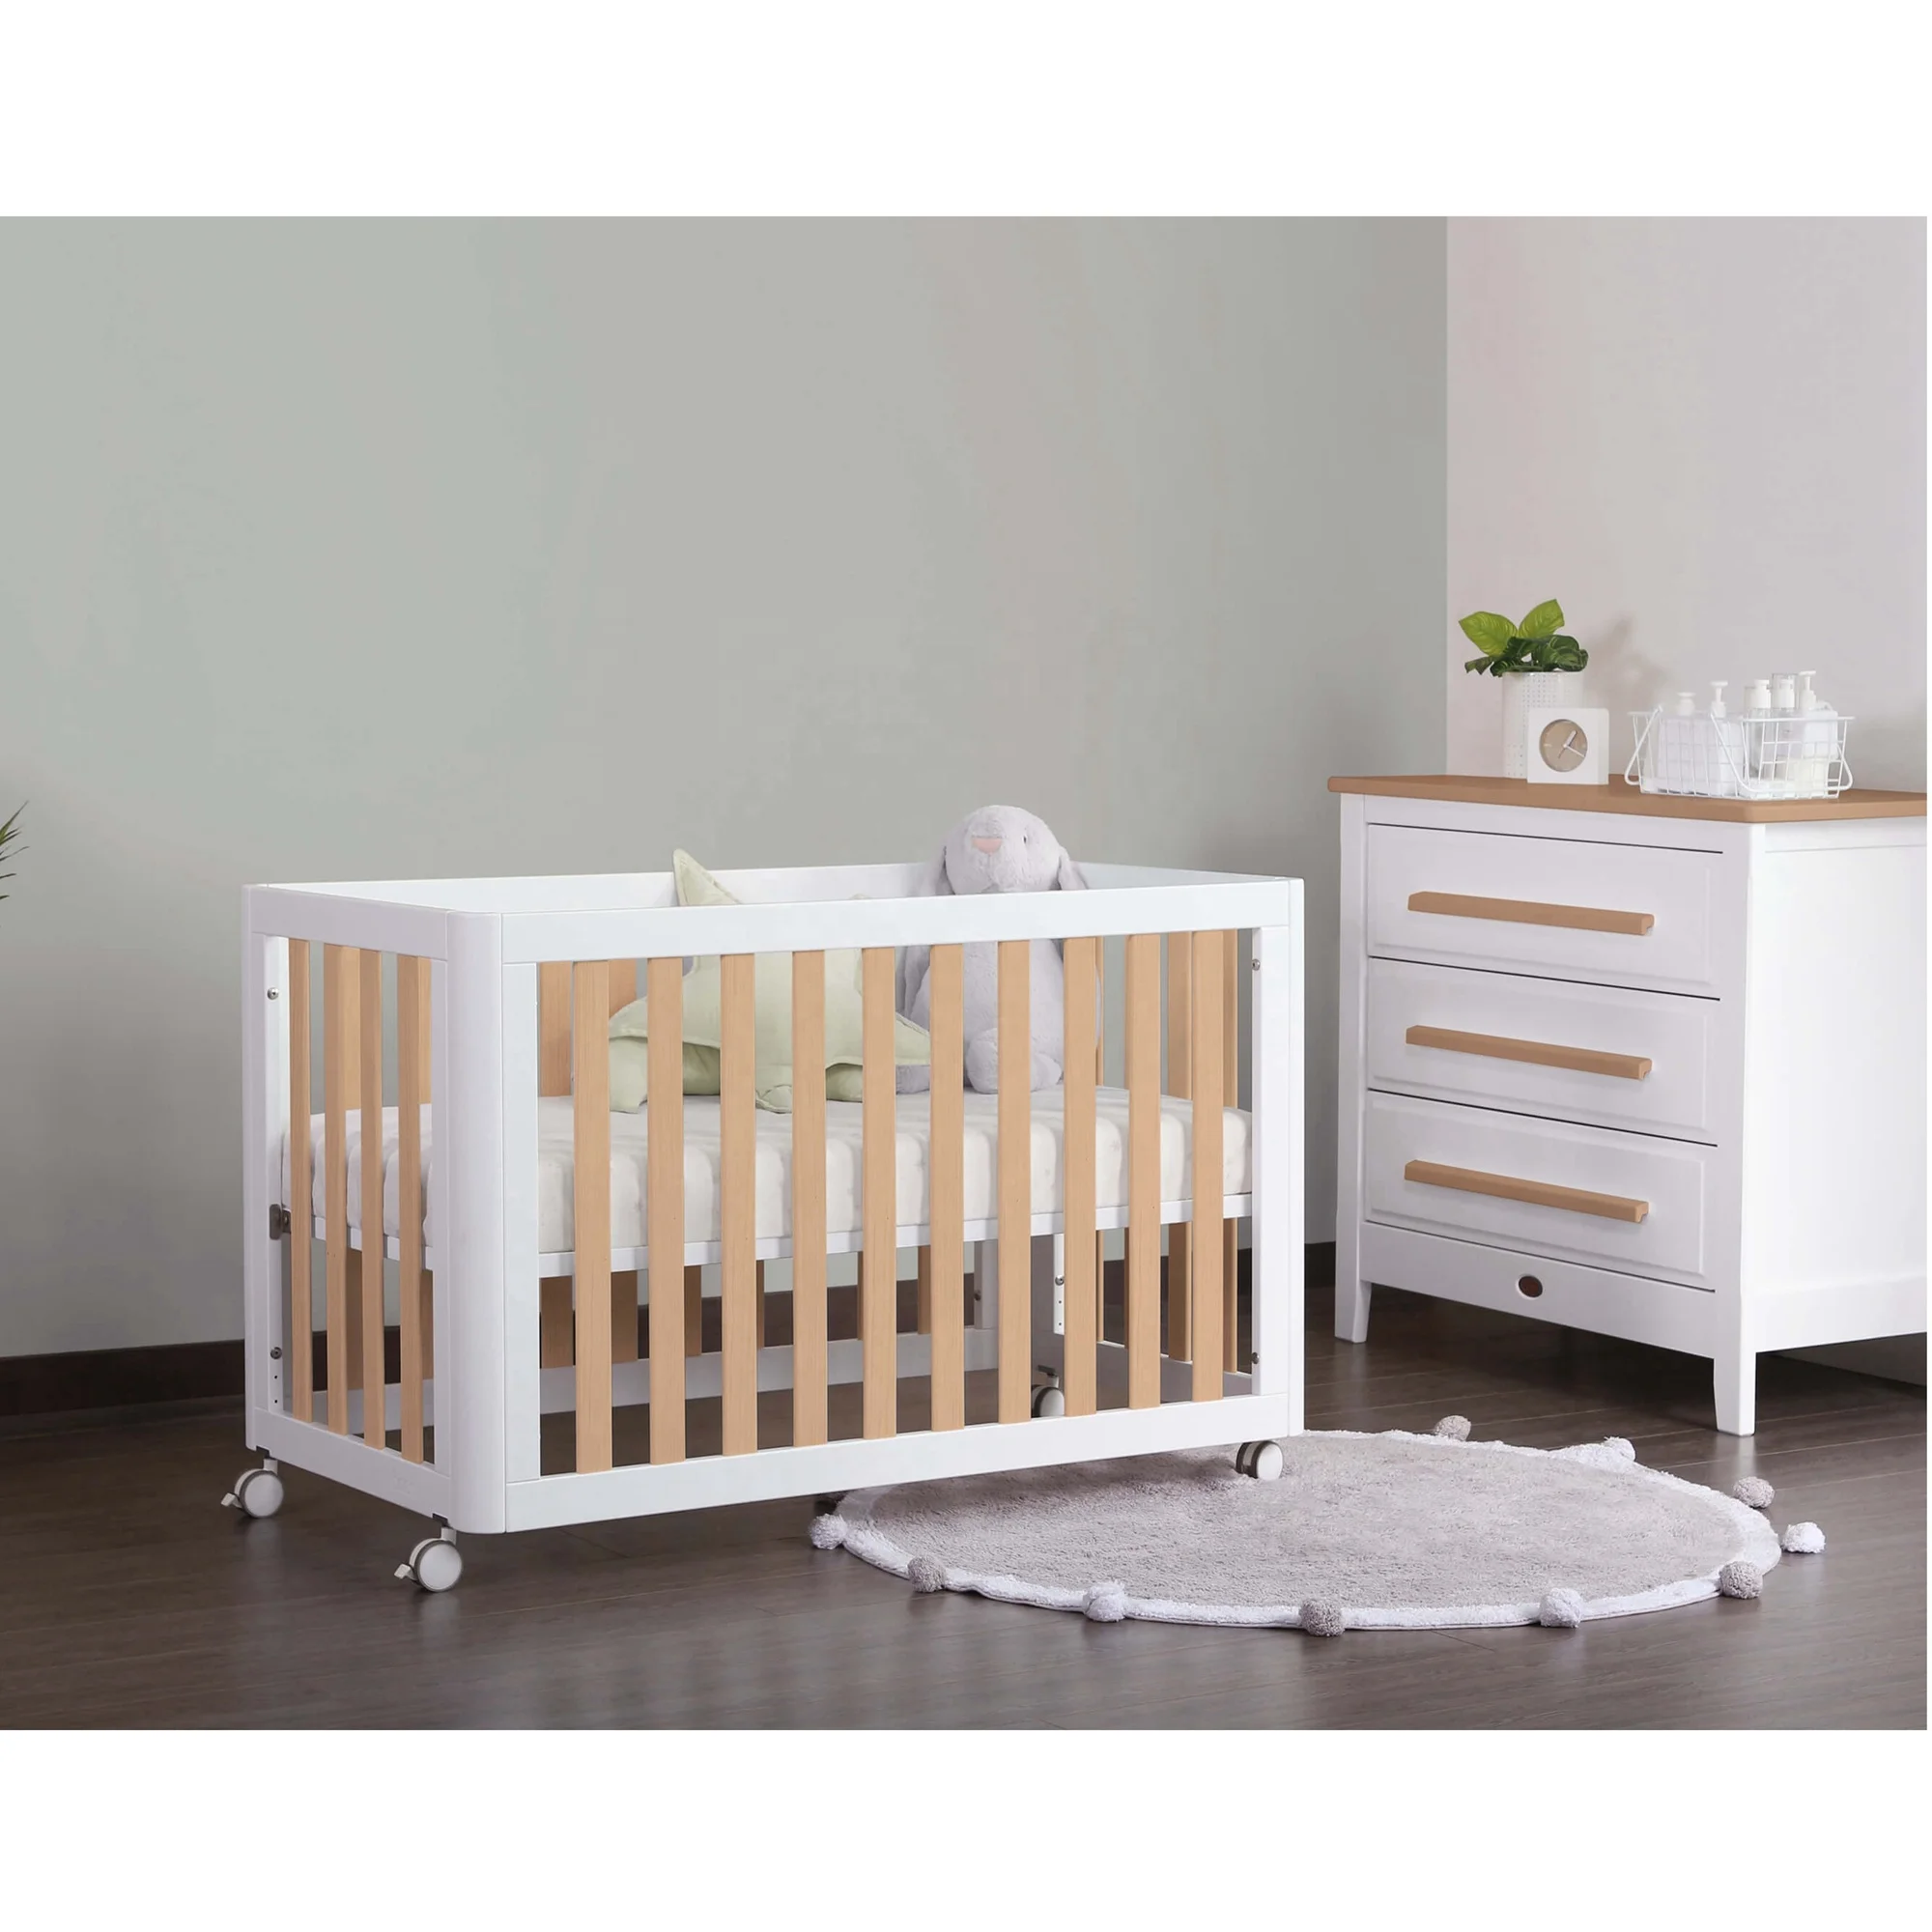 22NVCB048 High Quality 4 In Convertible Crib New Born Baby Sleeping Bed Lit Bebe Wooden Babies Multifunction Crib Bed